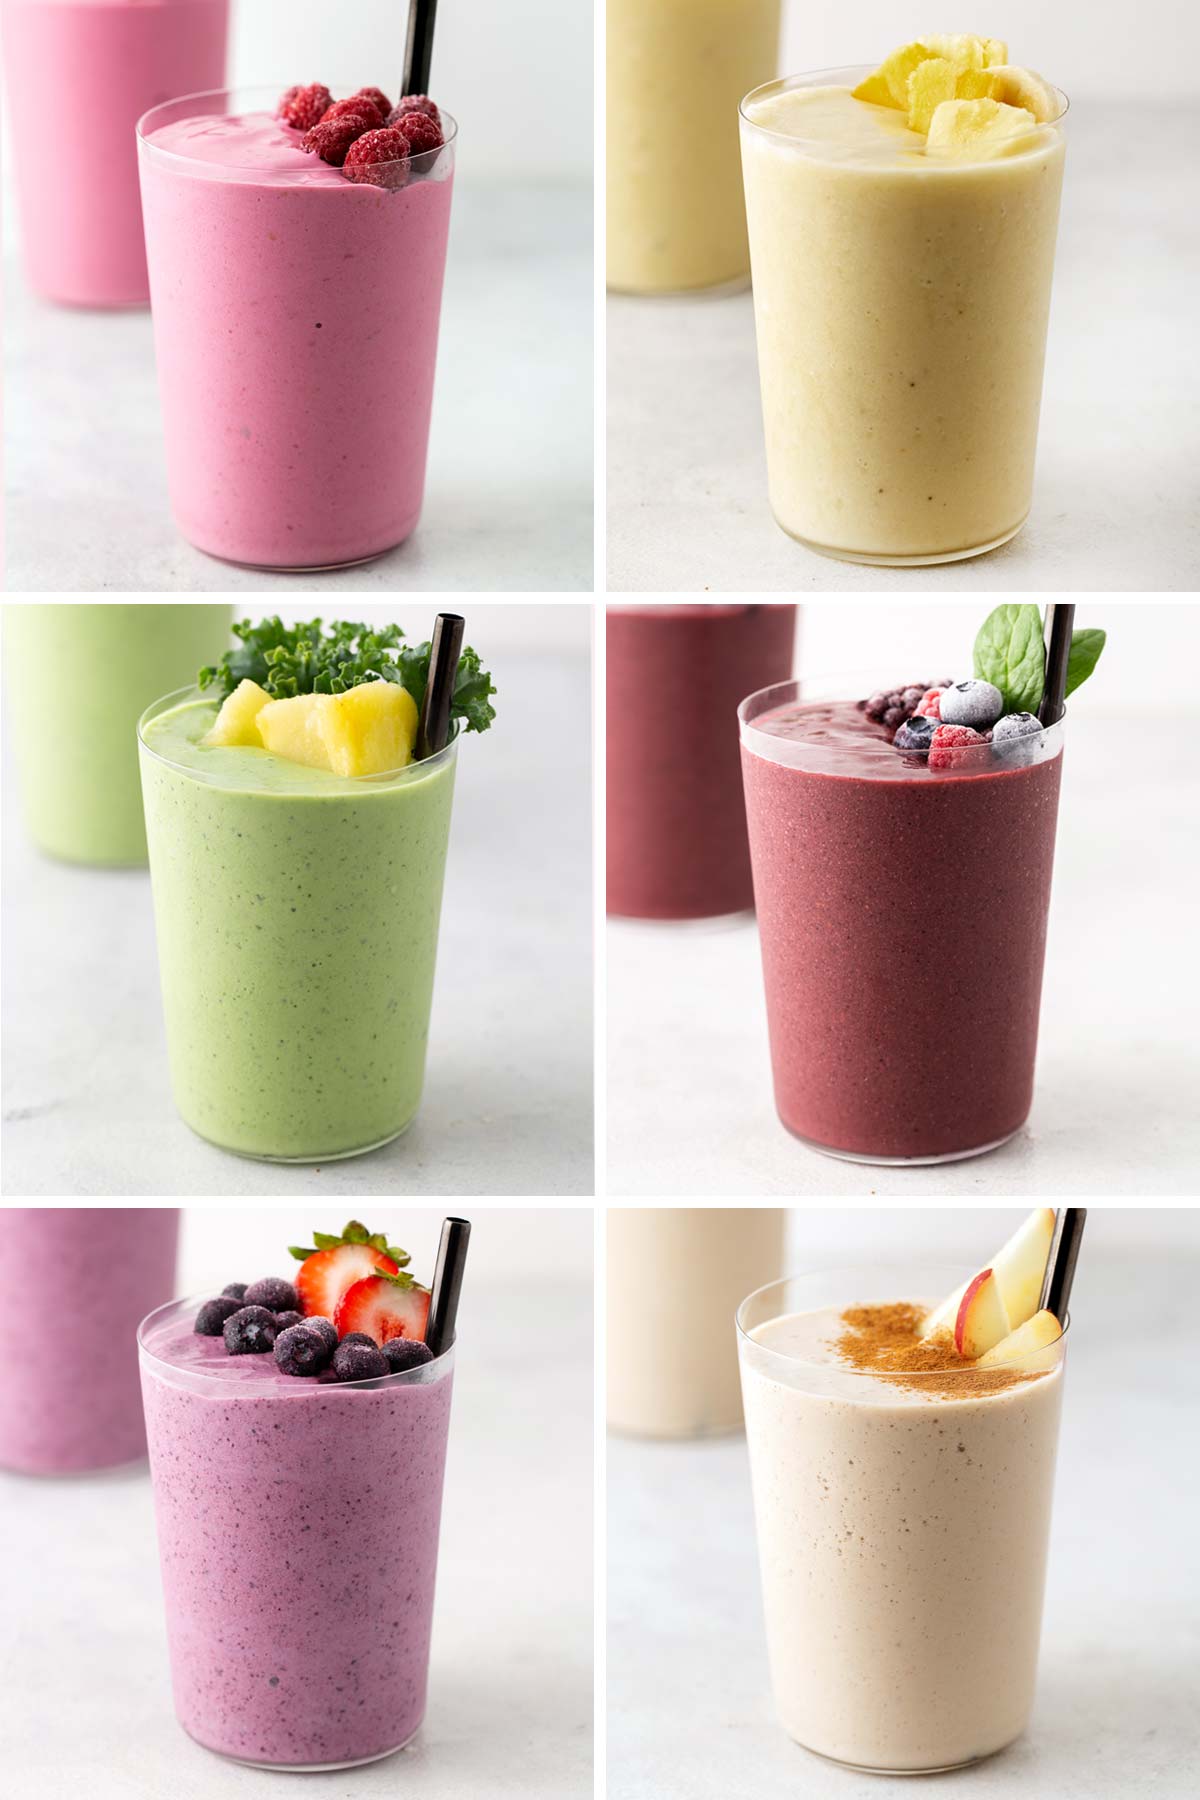 6 box grid with 6 different smoothies.